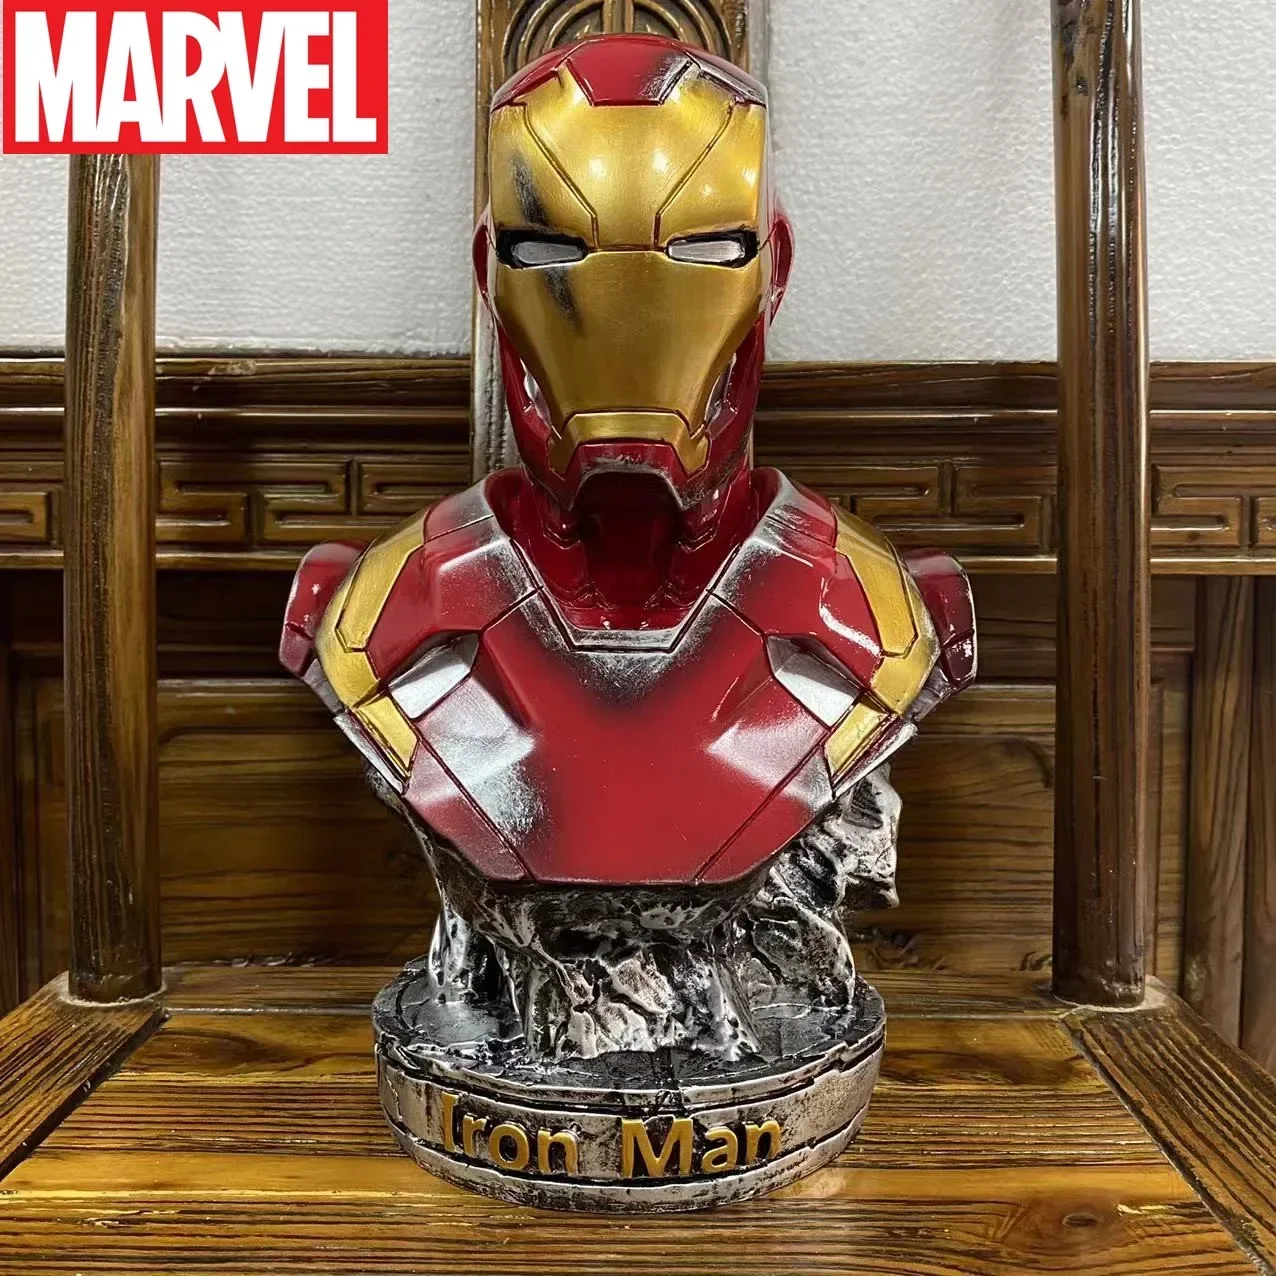 marvel-avengers-iron-man-anime-peripheral-black-panther-bust-1-1-figure-bust-living-room-ornament-large-resin-children-gift